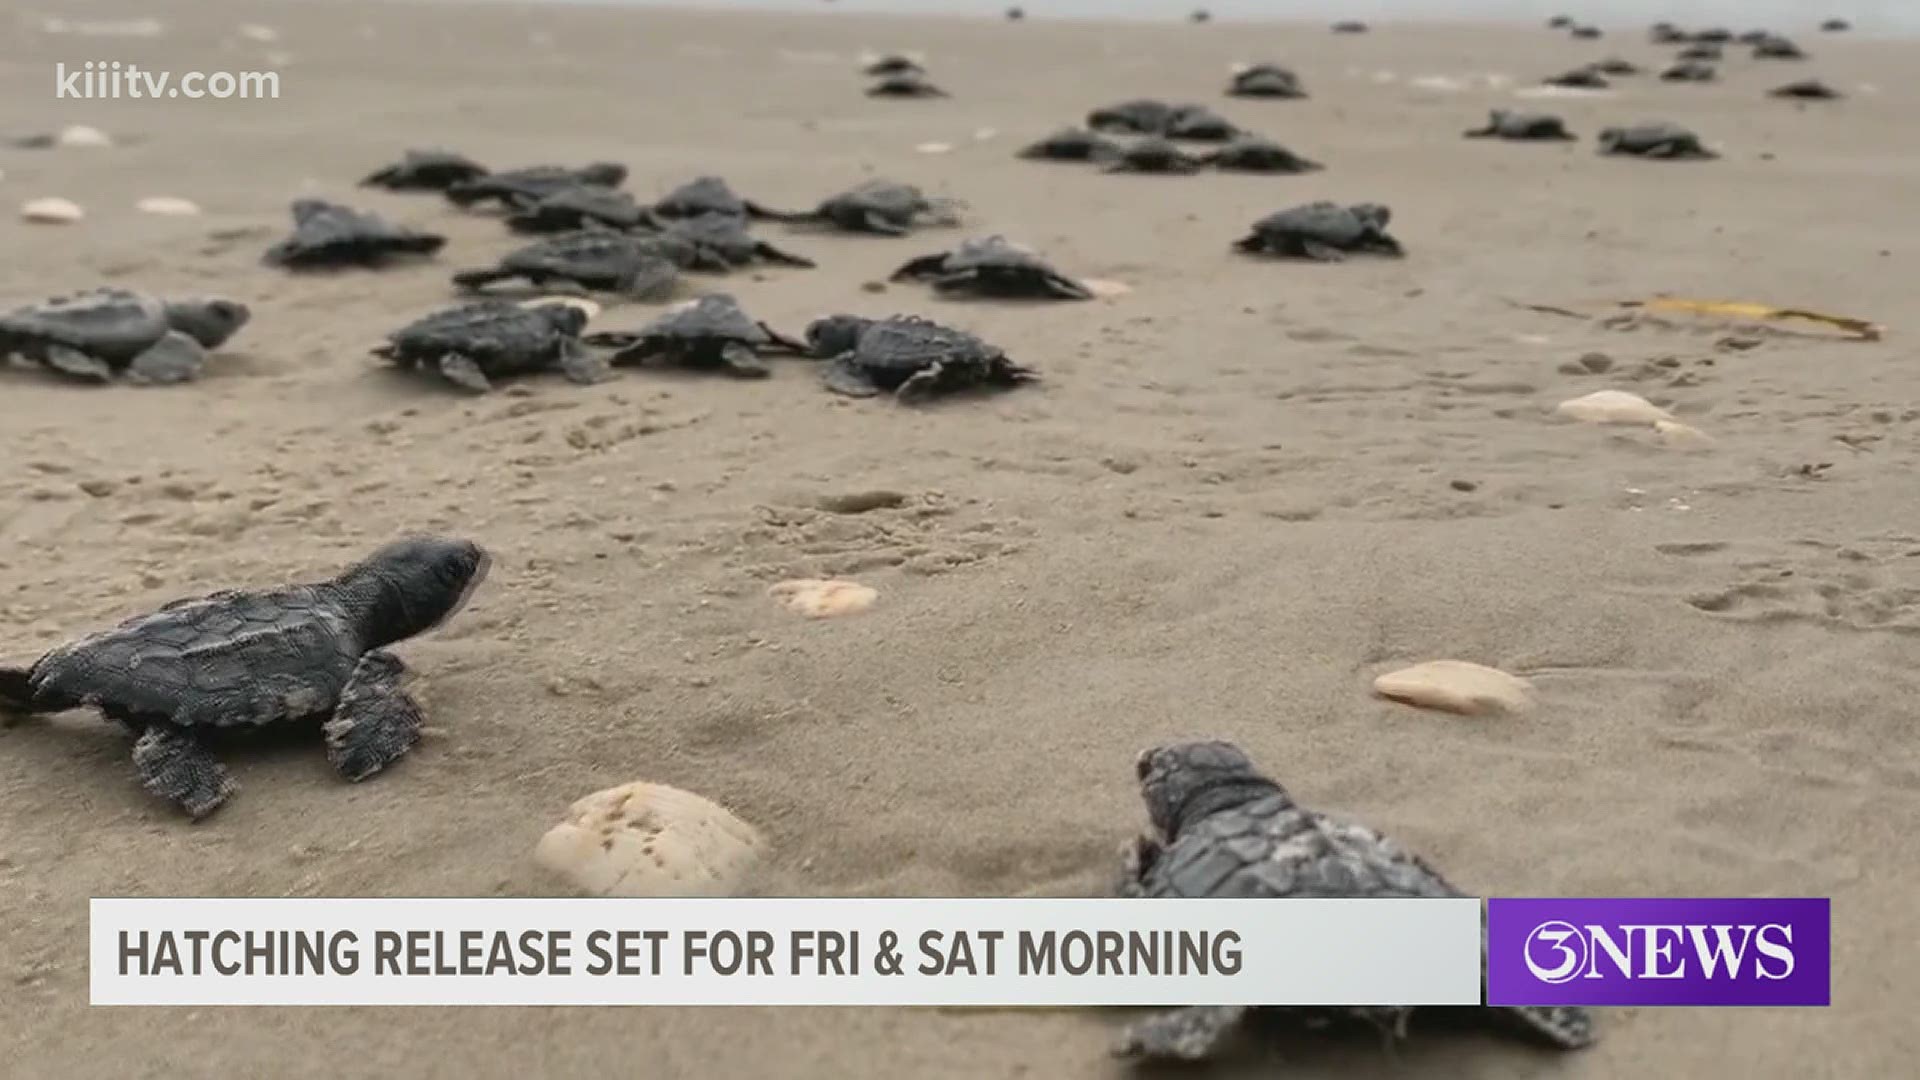 The releases, which are open to the public, will be held on Friday and Saturday mornings at 6:45 a.m. at Malaquite Beach.